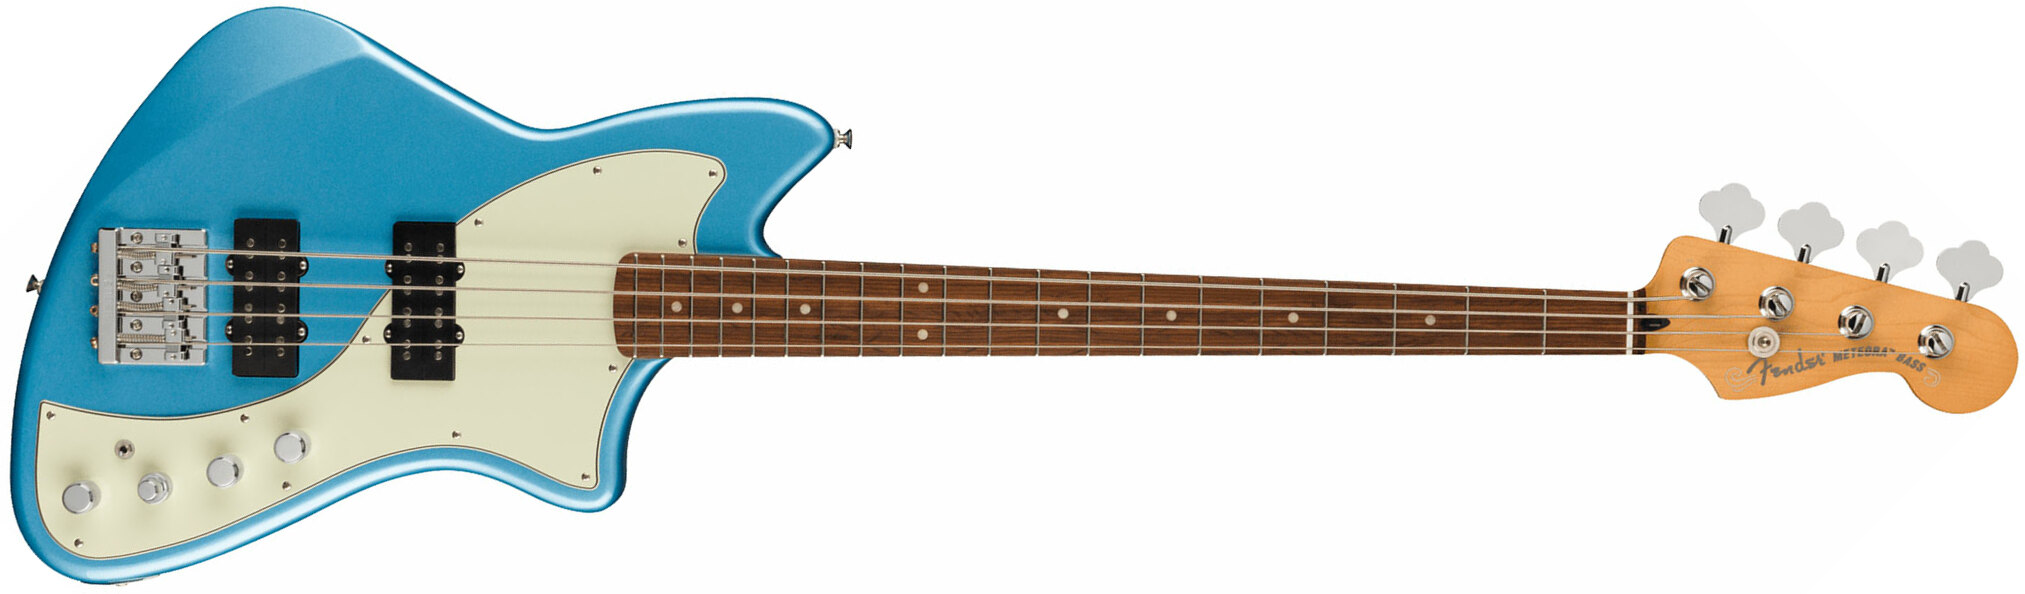 Fender Meteora Bass Active Player Plus Mex Pf - Opal Spark - Solid body electric bass - Main picture